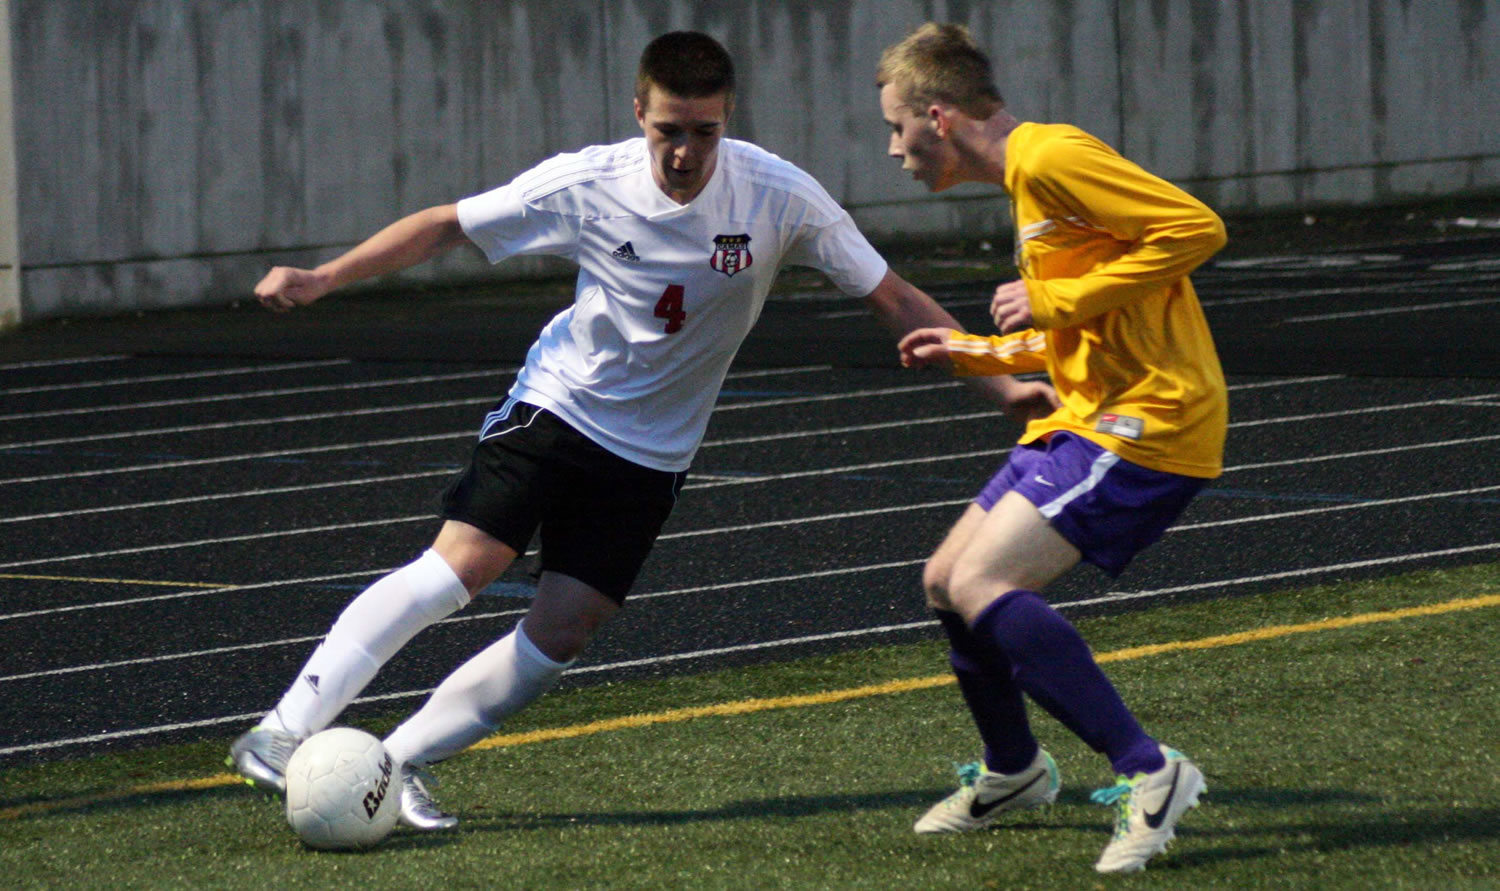 Camas forward Cayne Cardwell keeps the soccer ball alive for the Papermakers in the far right corner at Doc Harris Stadium.